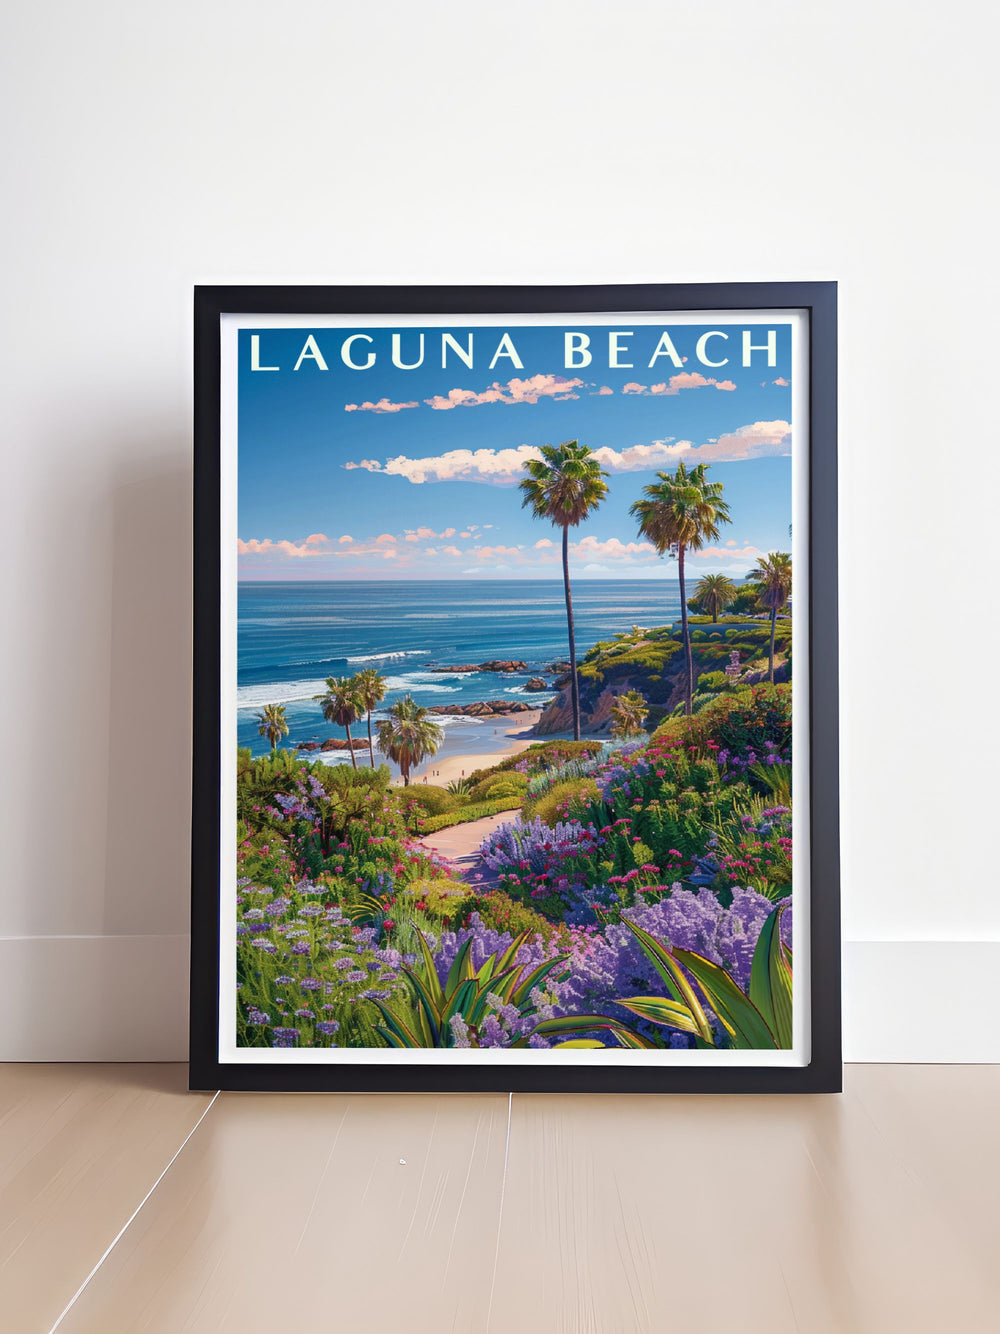 Colorful Laguna Beach Poster with Heisler Park scene is a stunning piece of artwork that brings the beauty of Laguna Beach into your home perfect for gifts and wall decor.